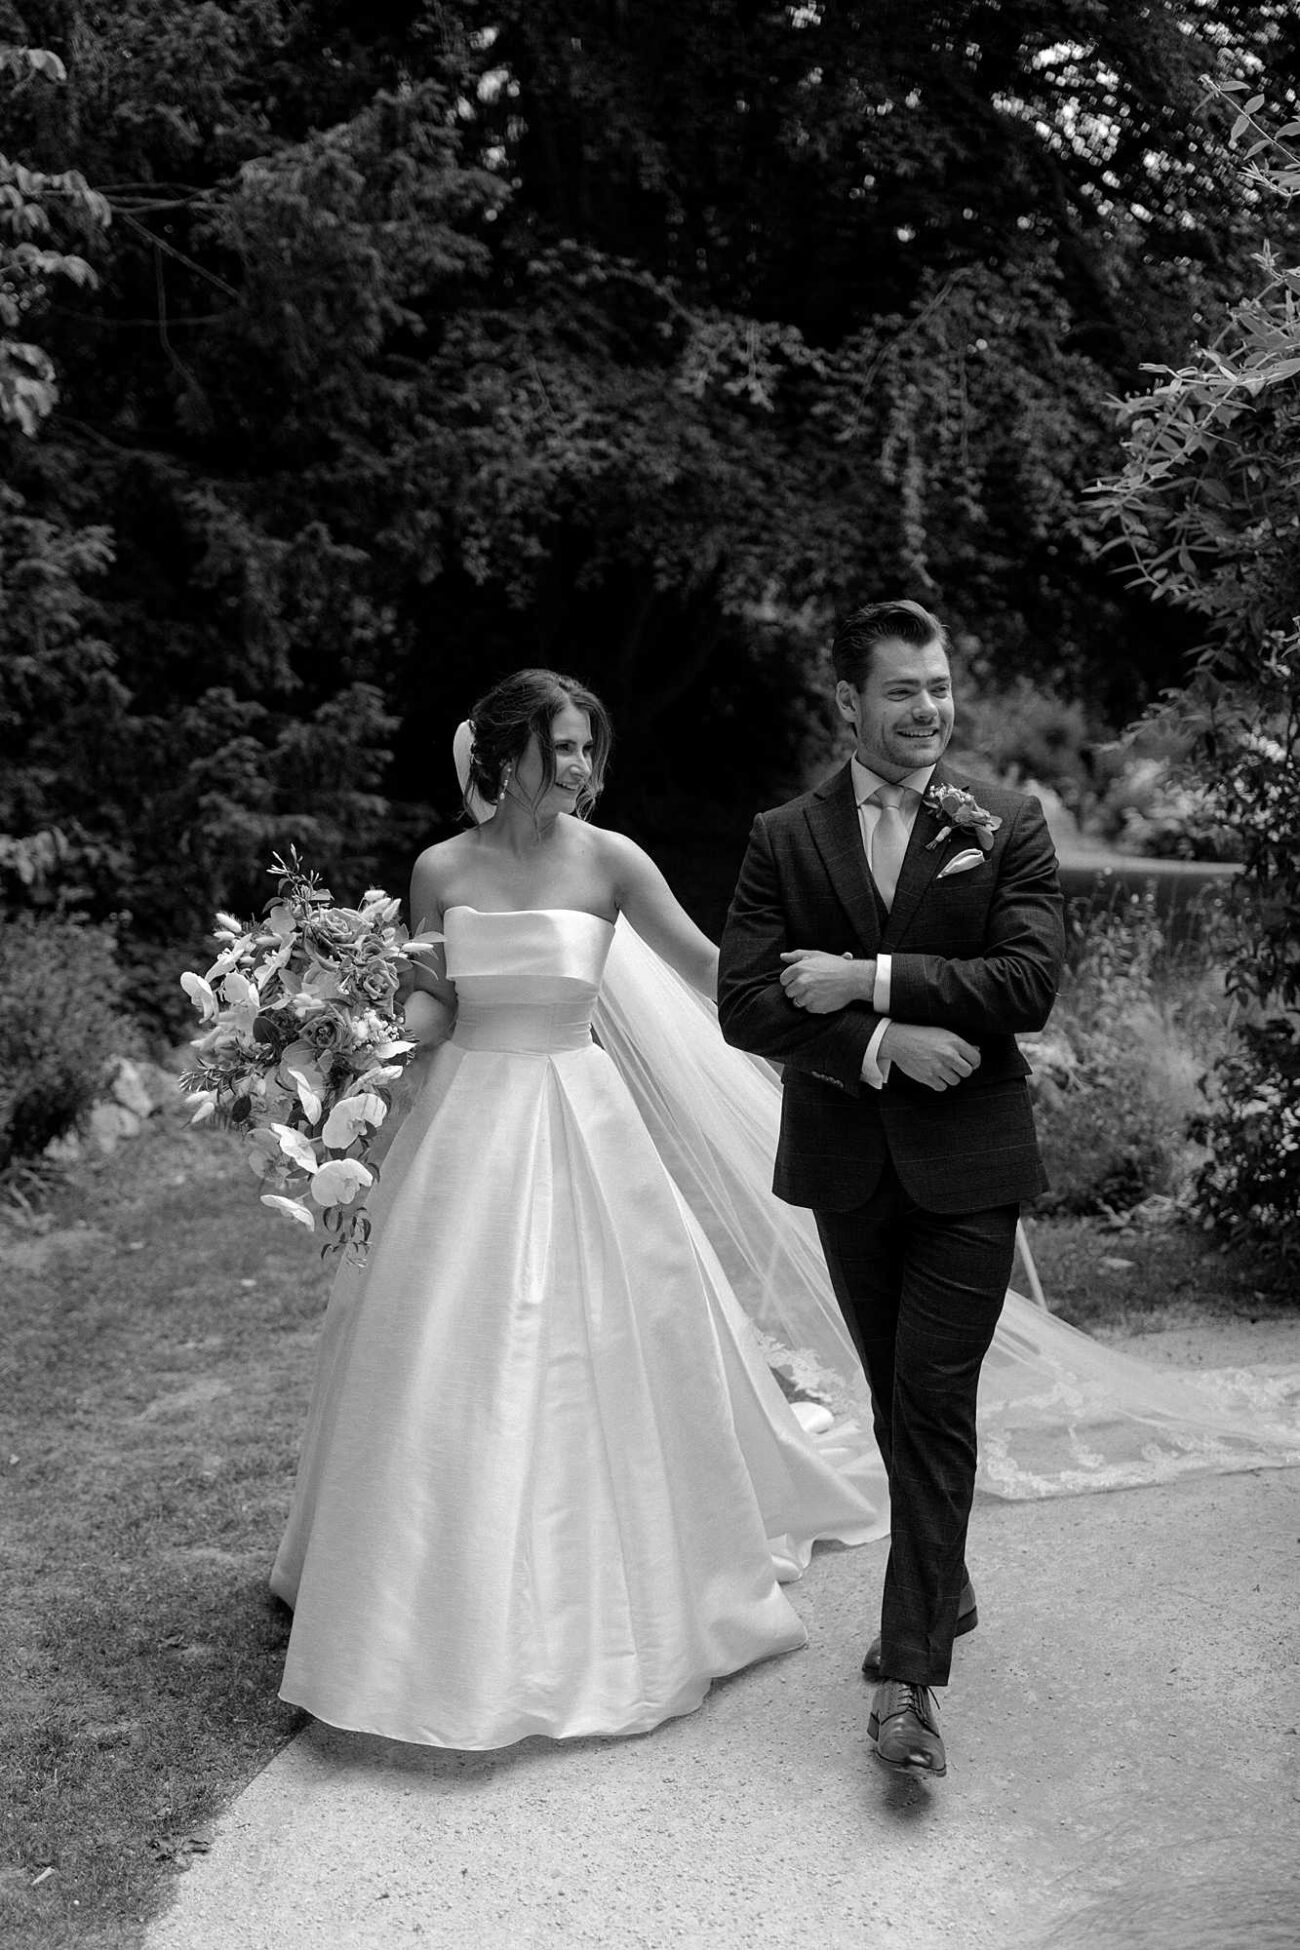 The Orangery in Maidstone wedding with Jane and Ben